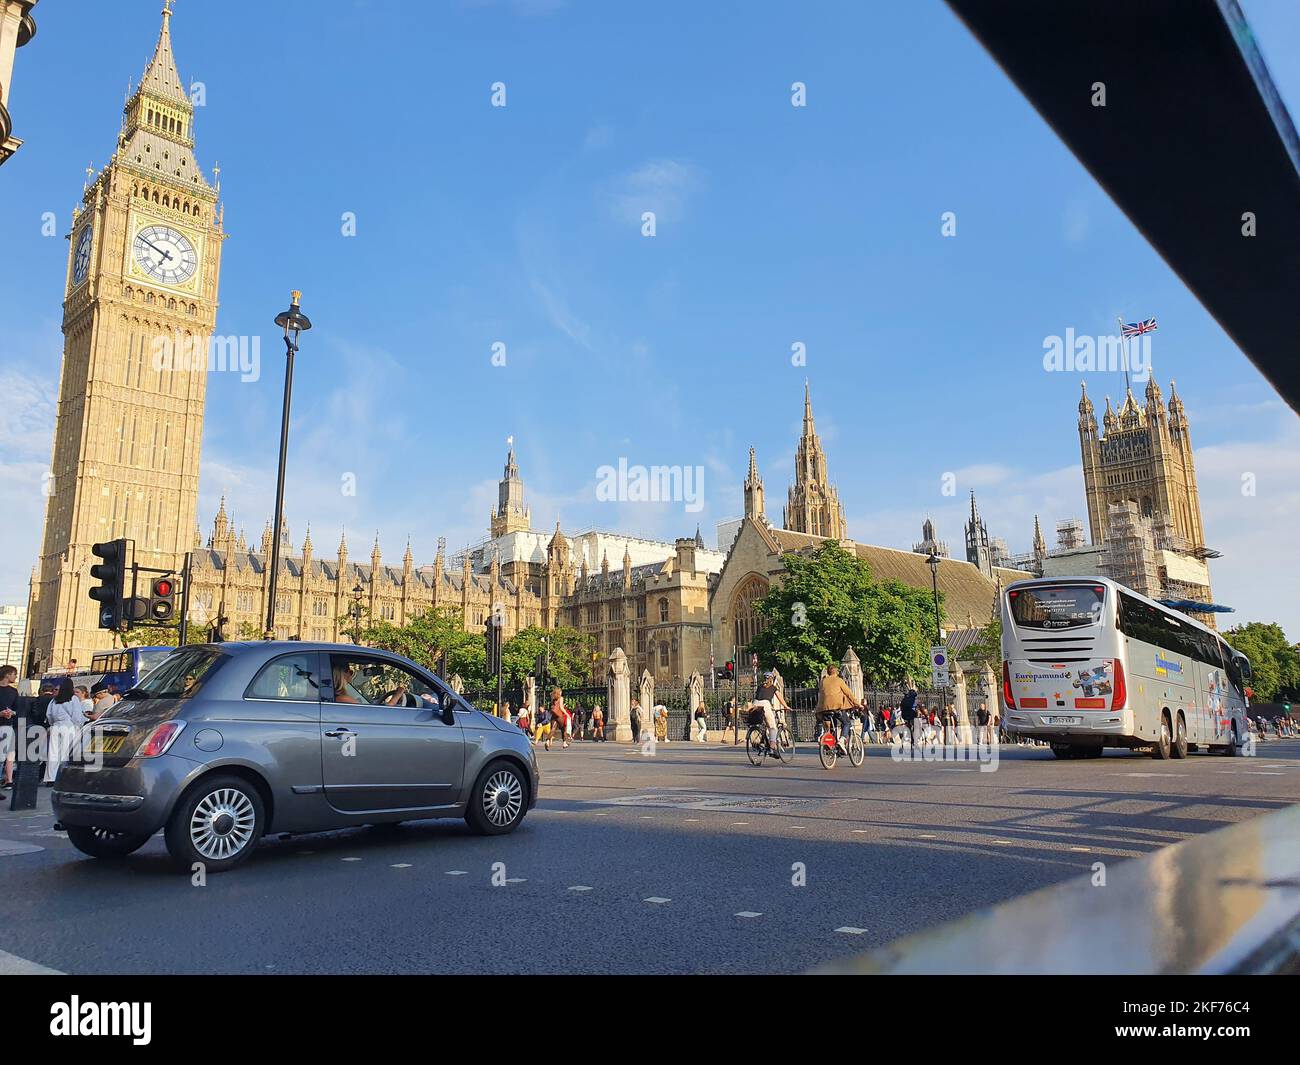 A London street view full of traffic and people, with Westminster Abby and Big Ben in the background, on a sunny day in summer Stock Photo